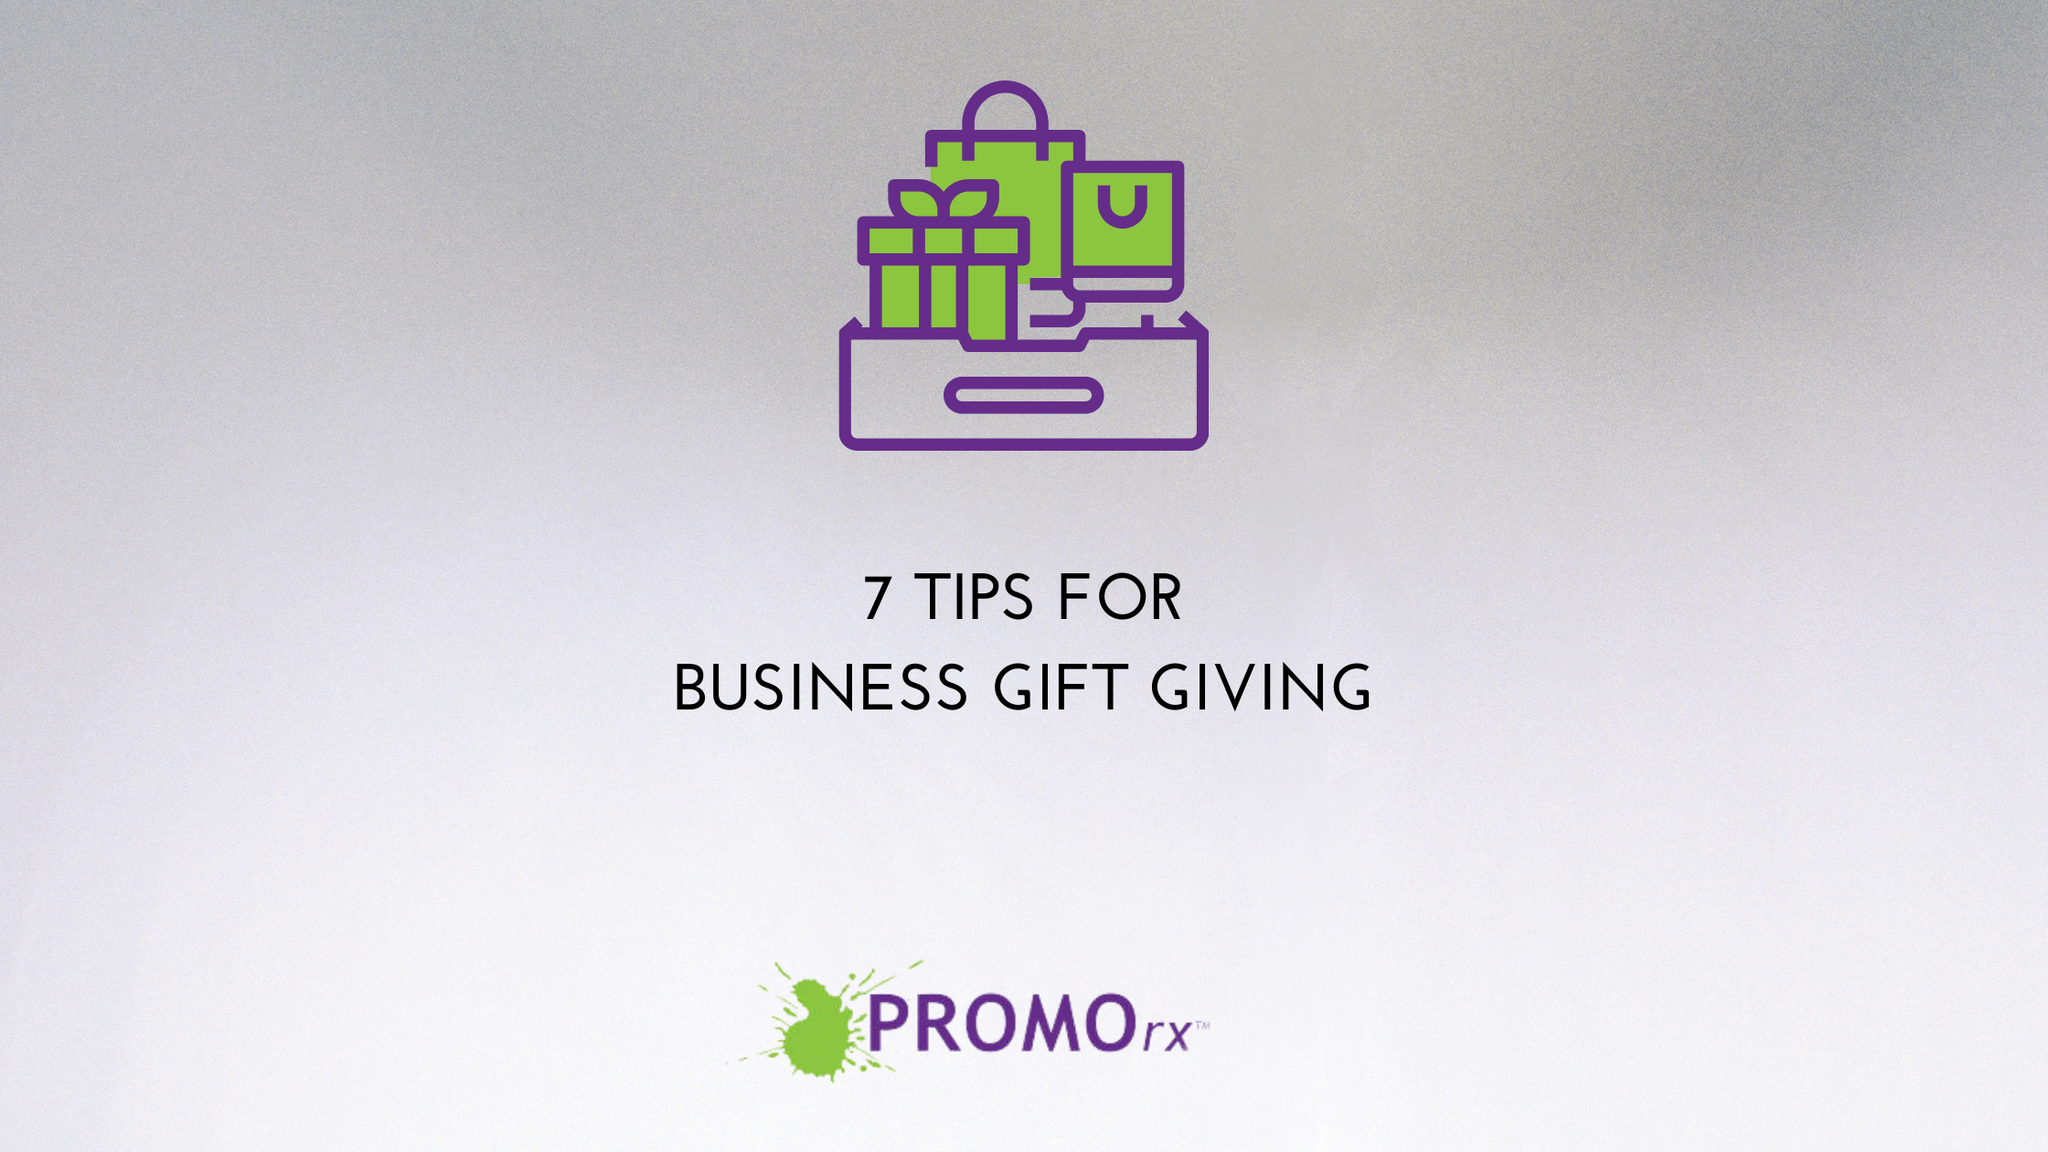 7 Tips for Business Gift Giving